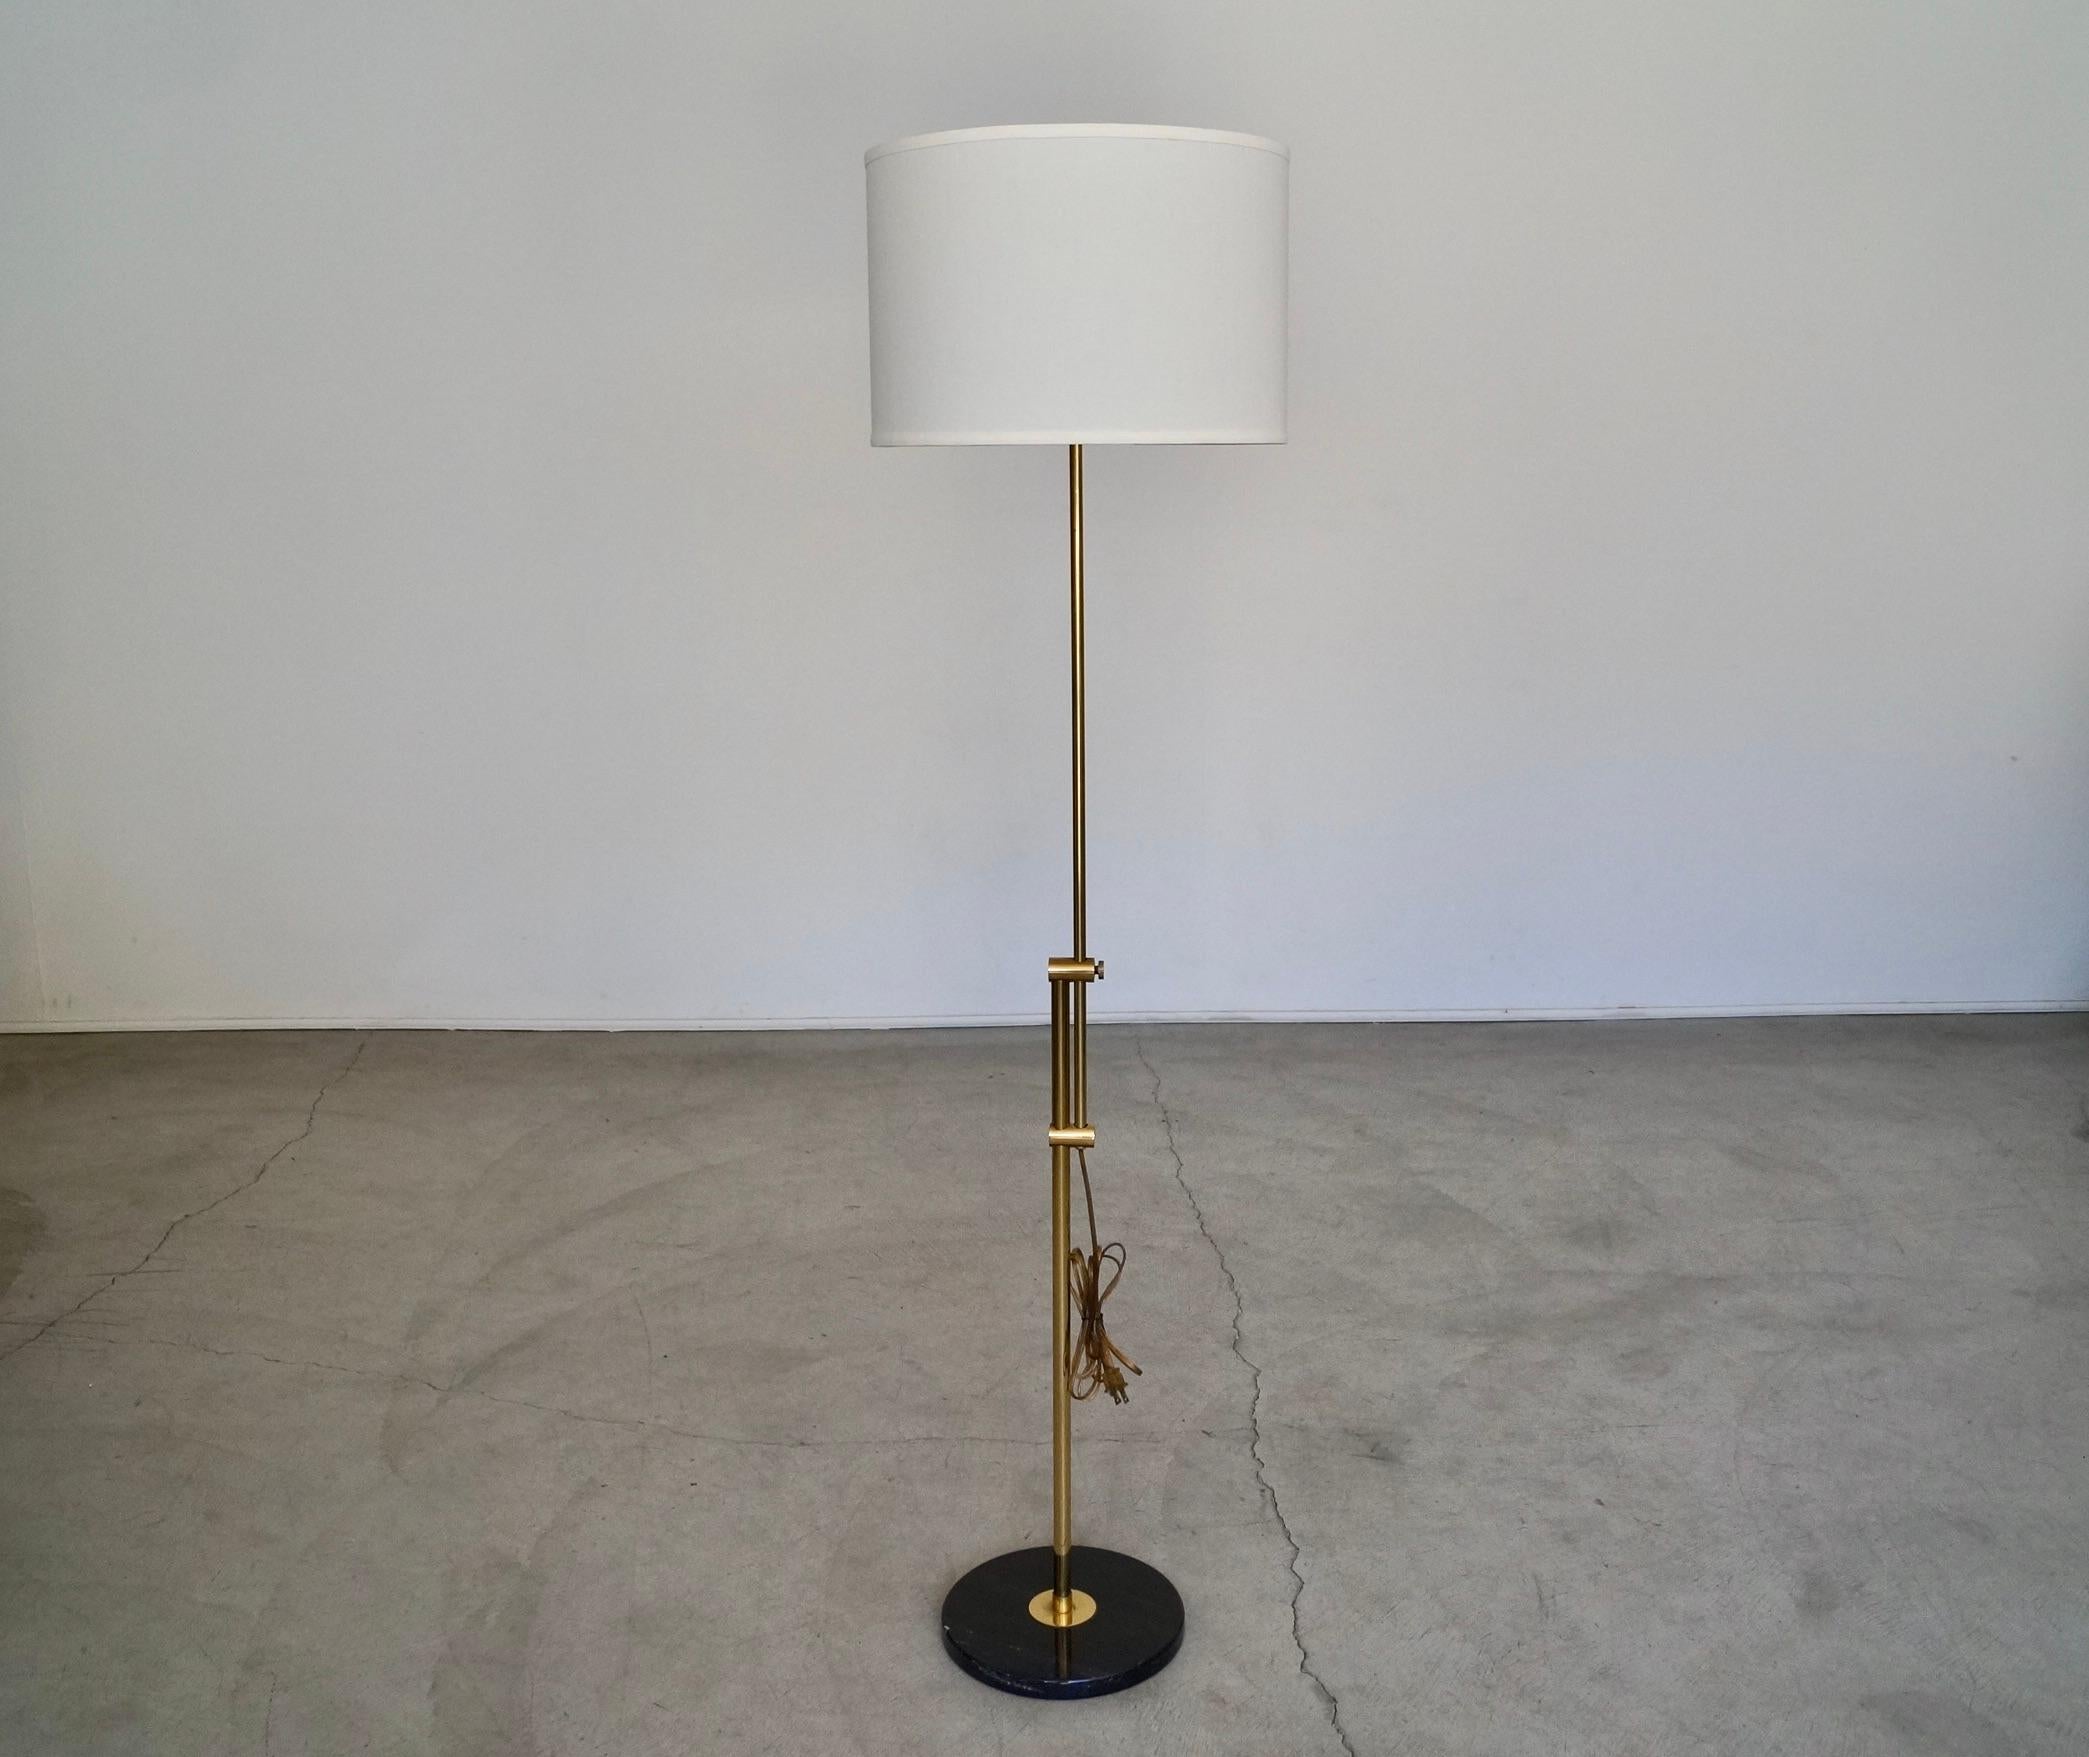 Vintage 1960’s Mid century Modern floor lamp for sale. It’s an incredible lamp with a solid marble base and brass poles and accents. The height is adjustable and the mechanism works smoothly. It’s really solid and well made, and in the manner of